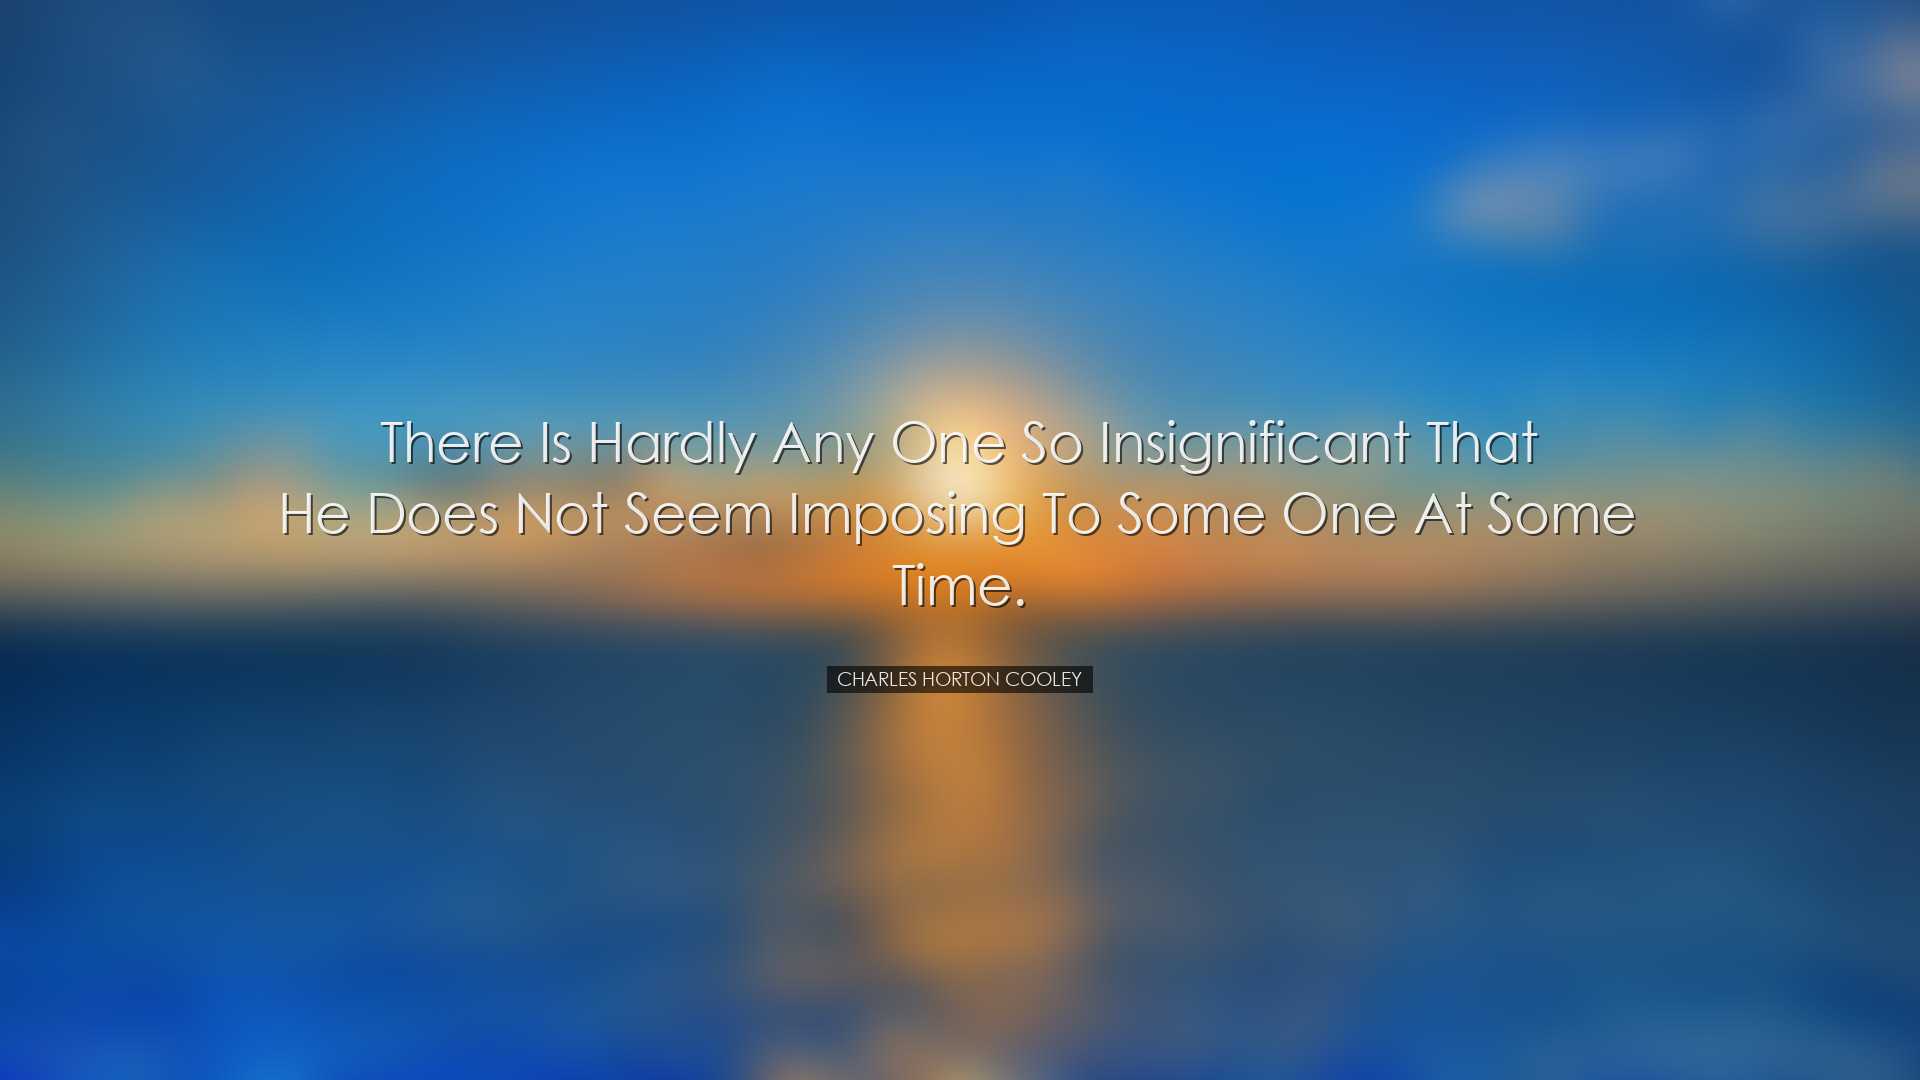 There is hardly any one so insignificant that he does not seem imp